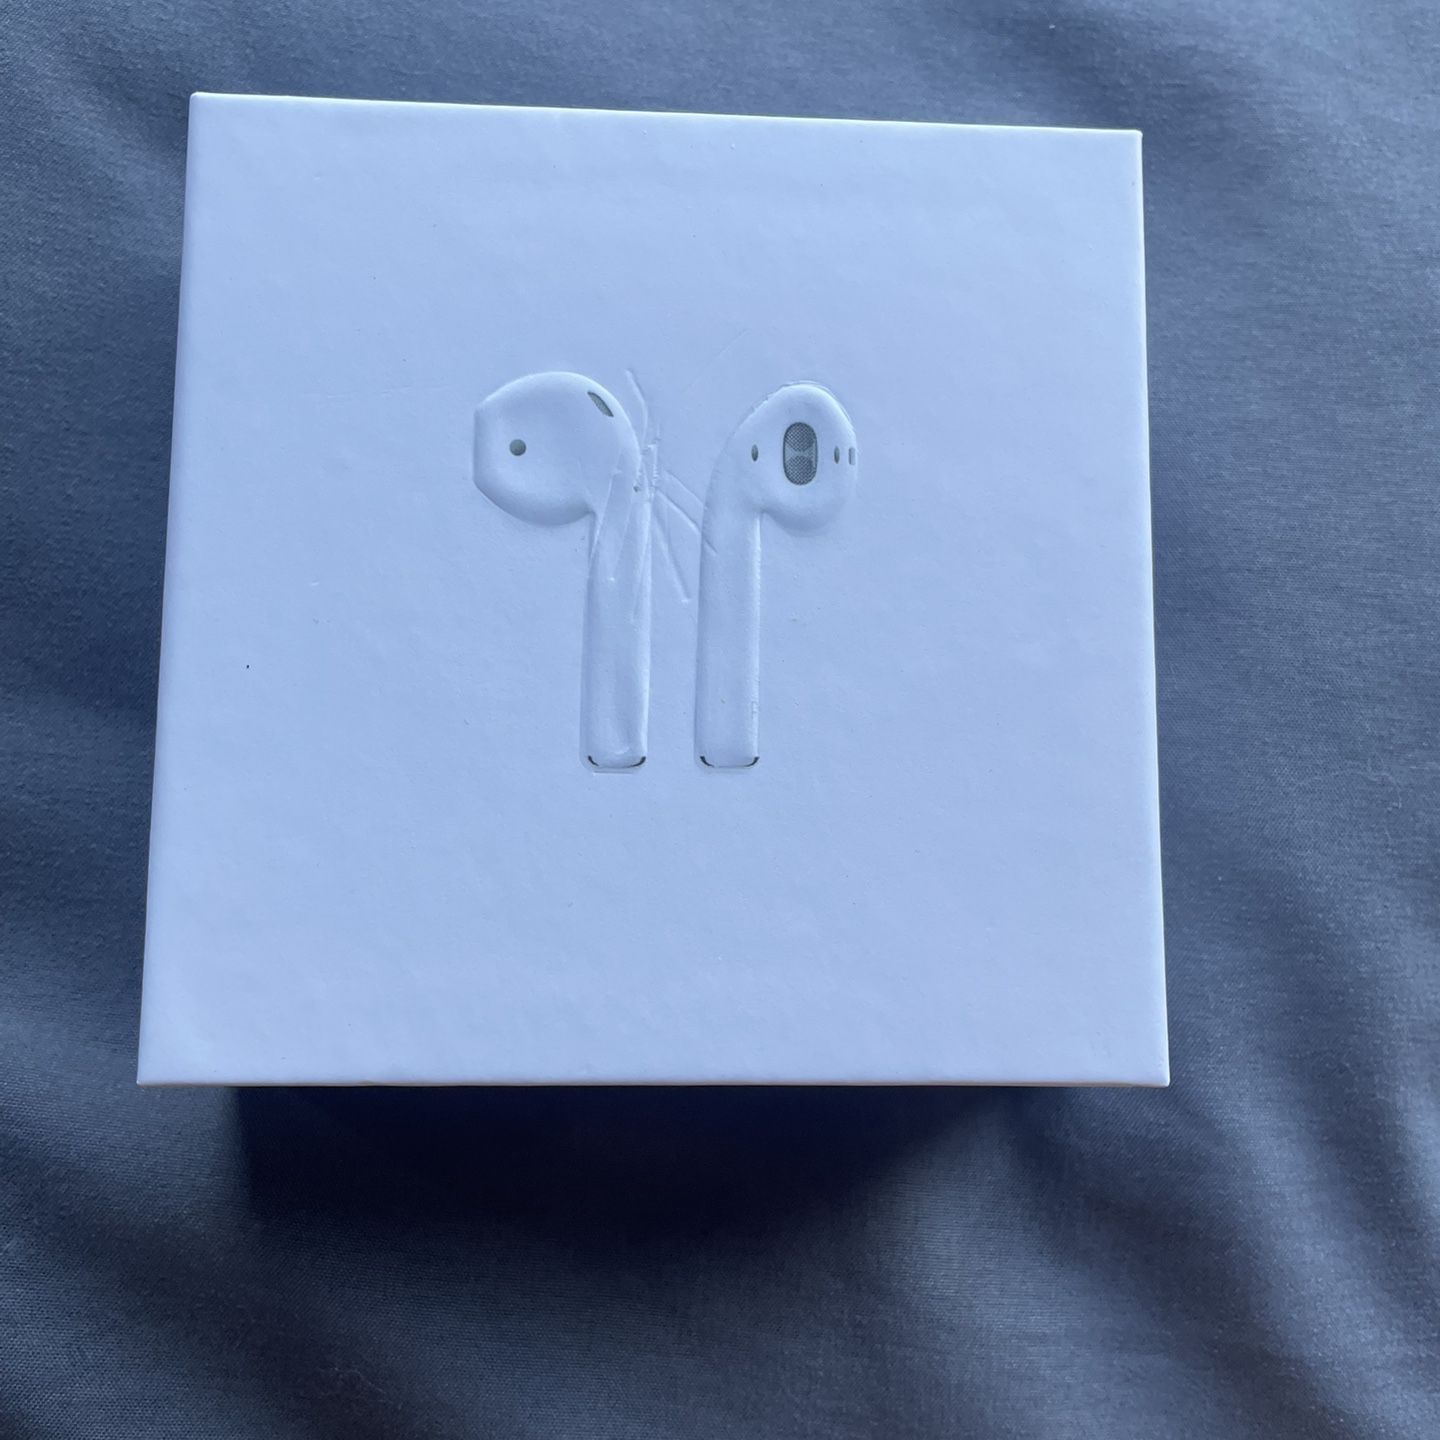 AirPods (Never Used)